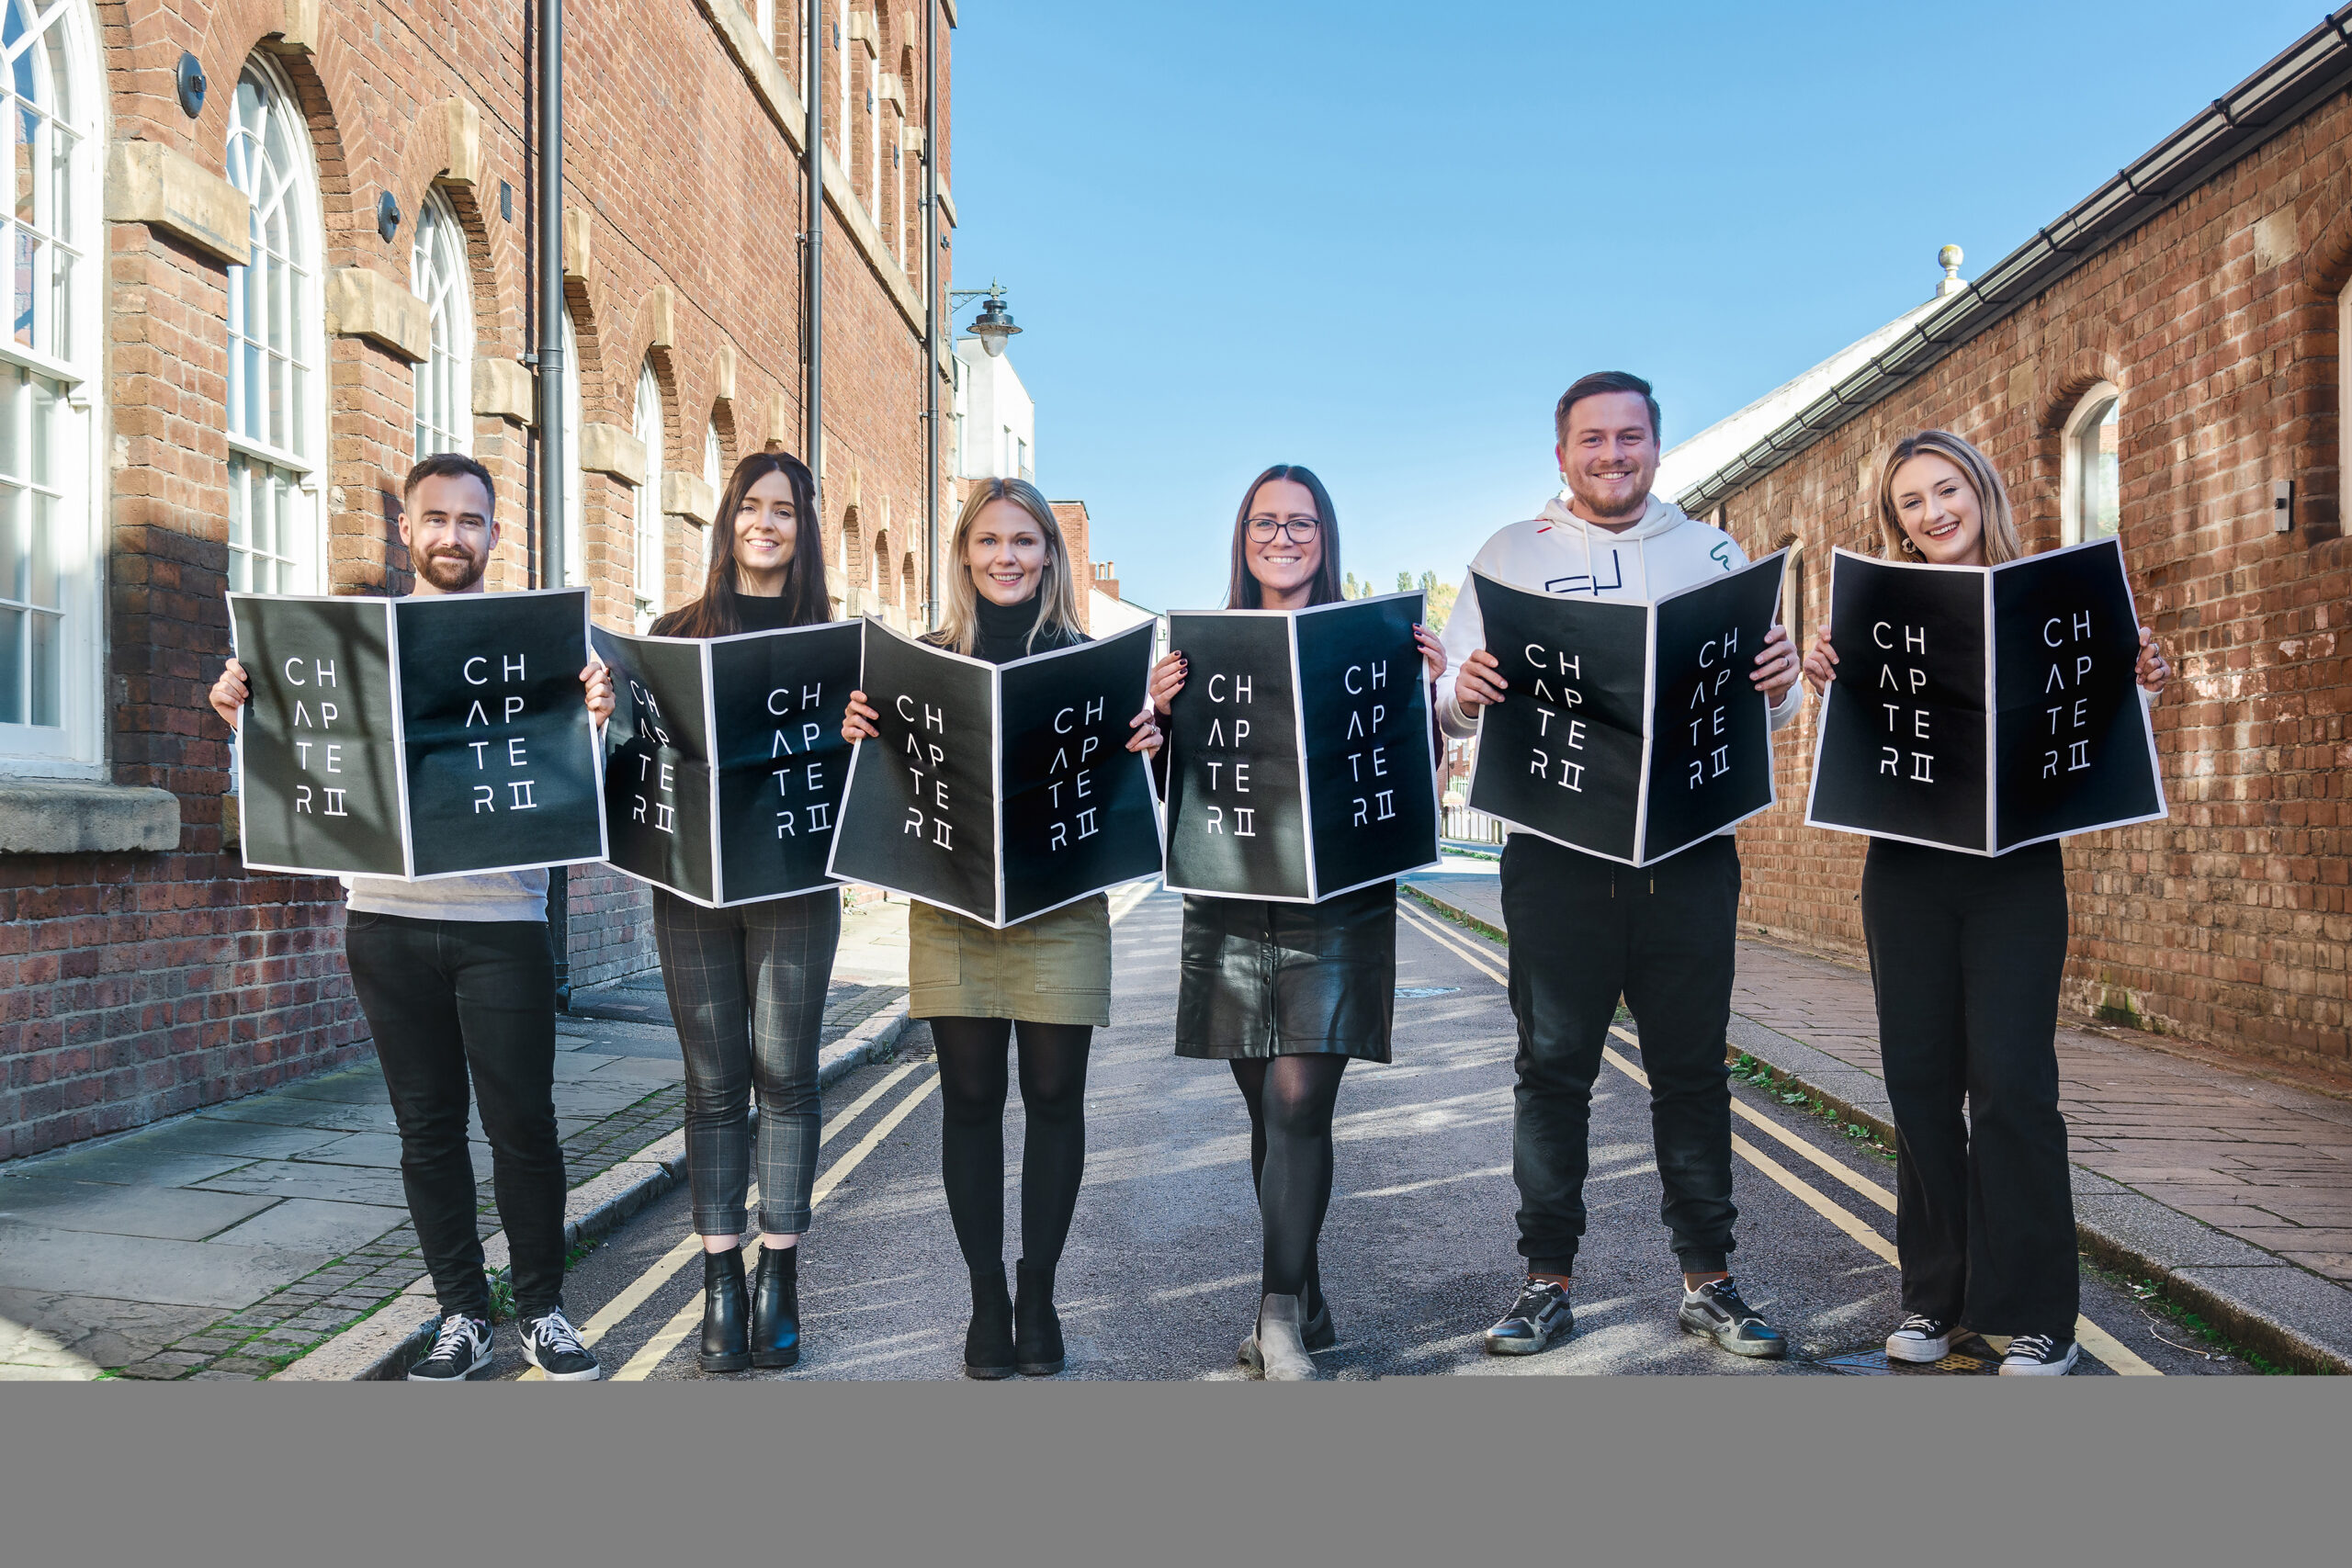 Full rebrand and renewed vision for long-standing Sheffield PR agency